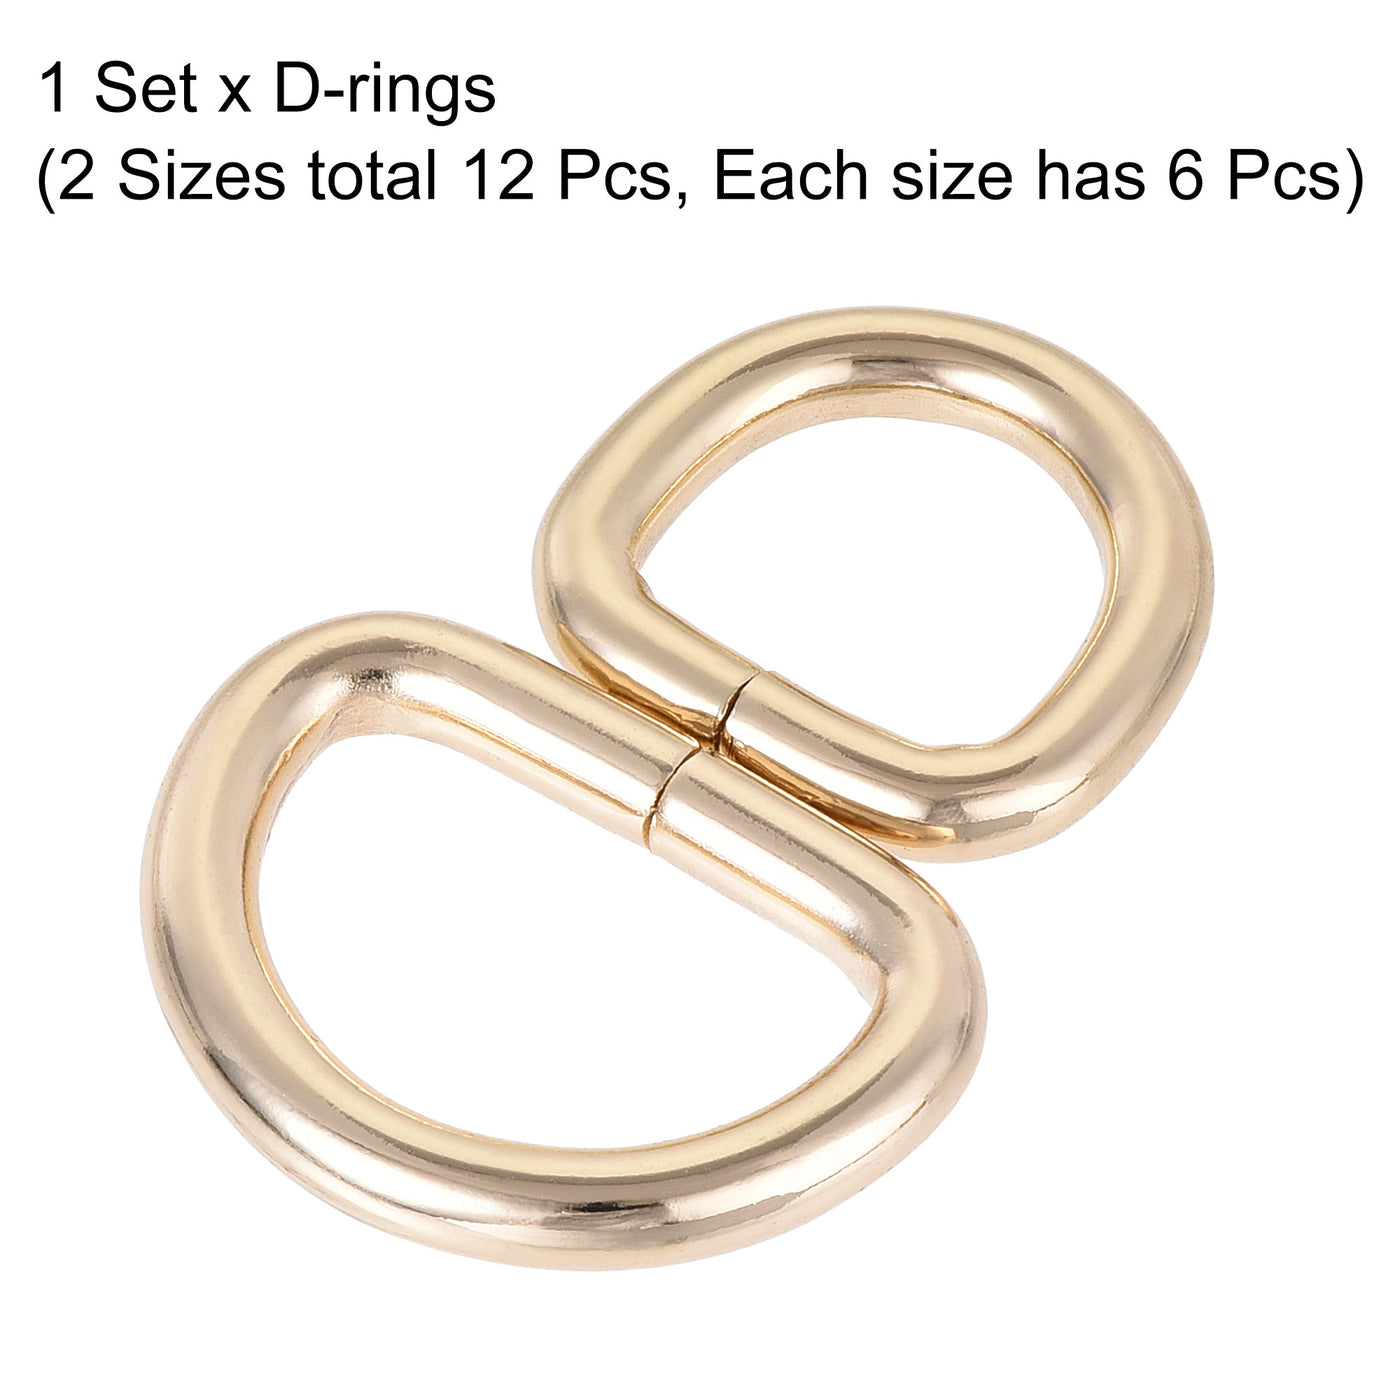 uxcell Uxcell Metal D Ring 0.63"(16mm) 0.98"(25mm) D-Rings Buckle Gold Tone, Total 12pcs